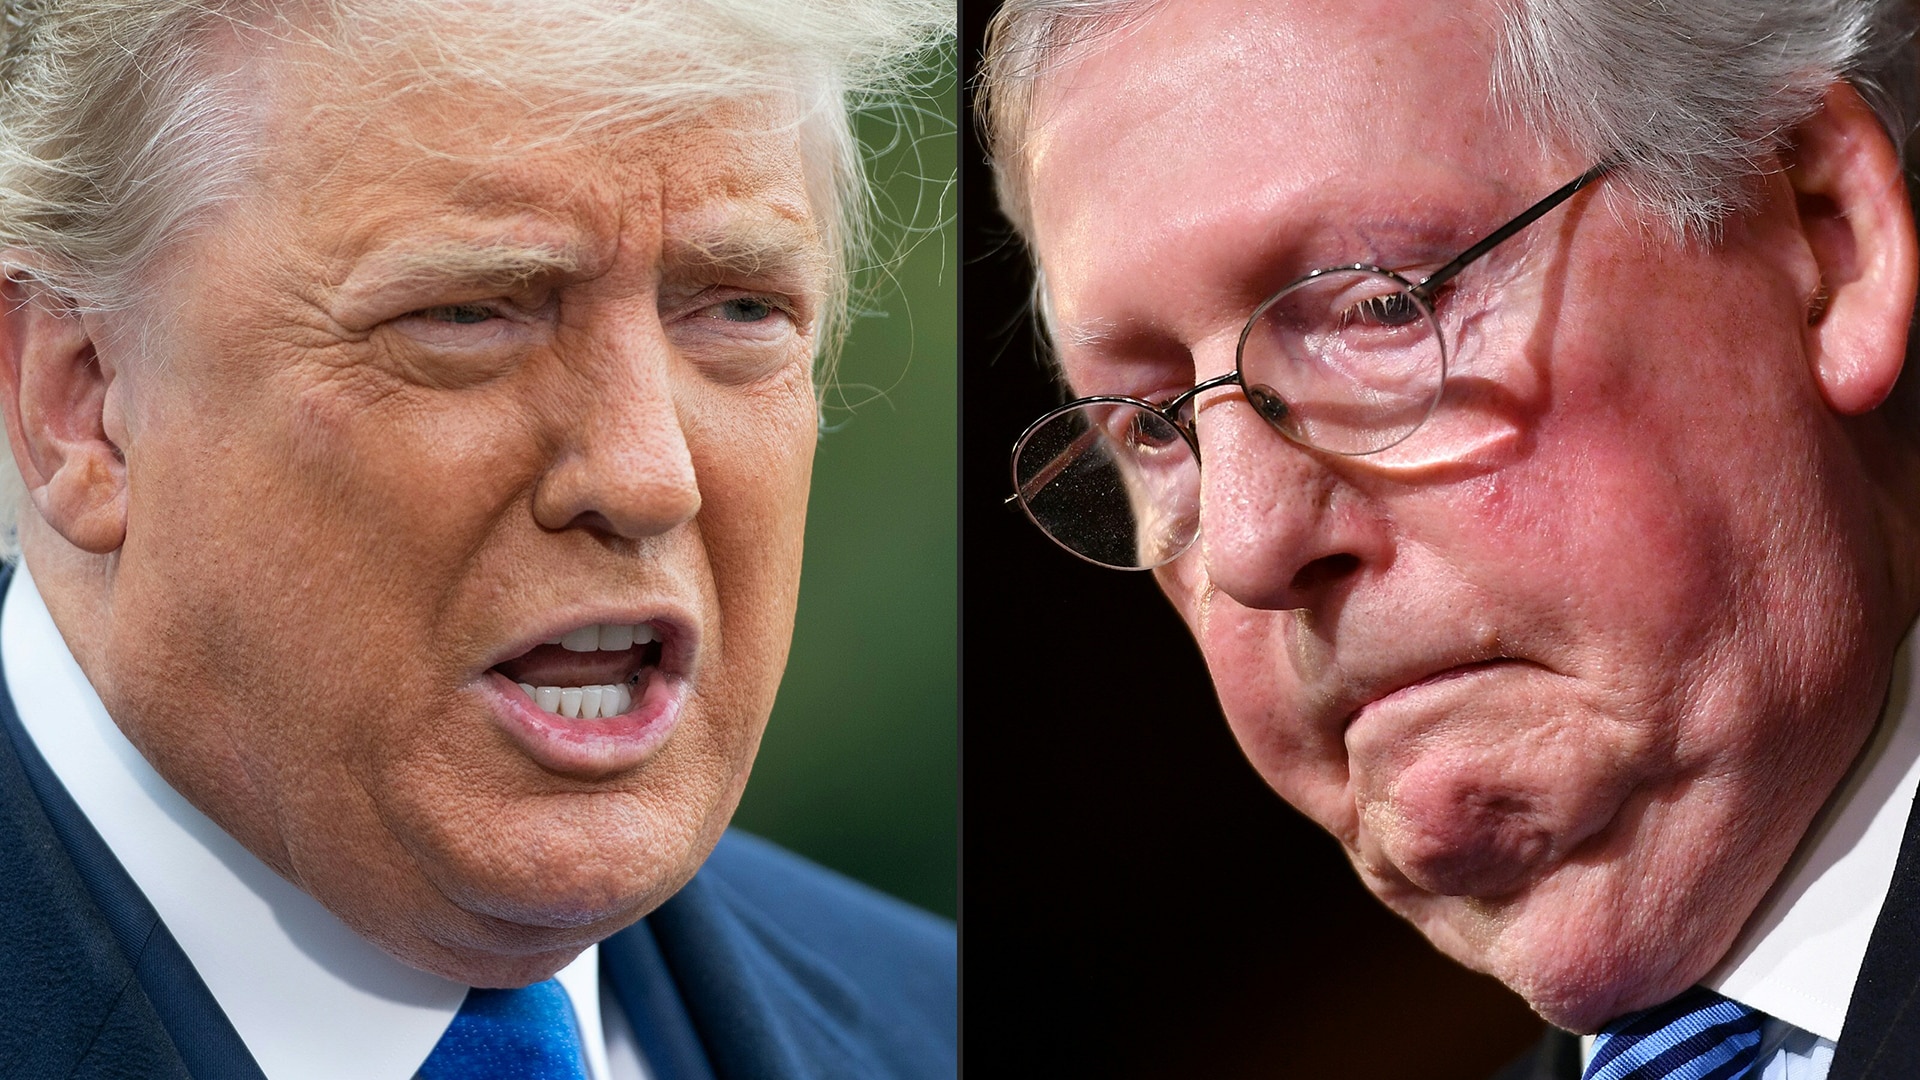 Senate Minority Leader Mitch McConnell Gives One-Word Response to Donald Trump Calling His Wife 'Crazy'